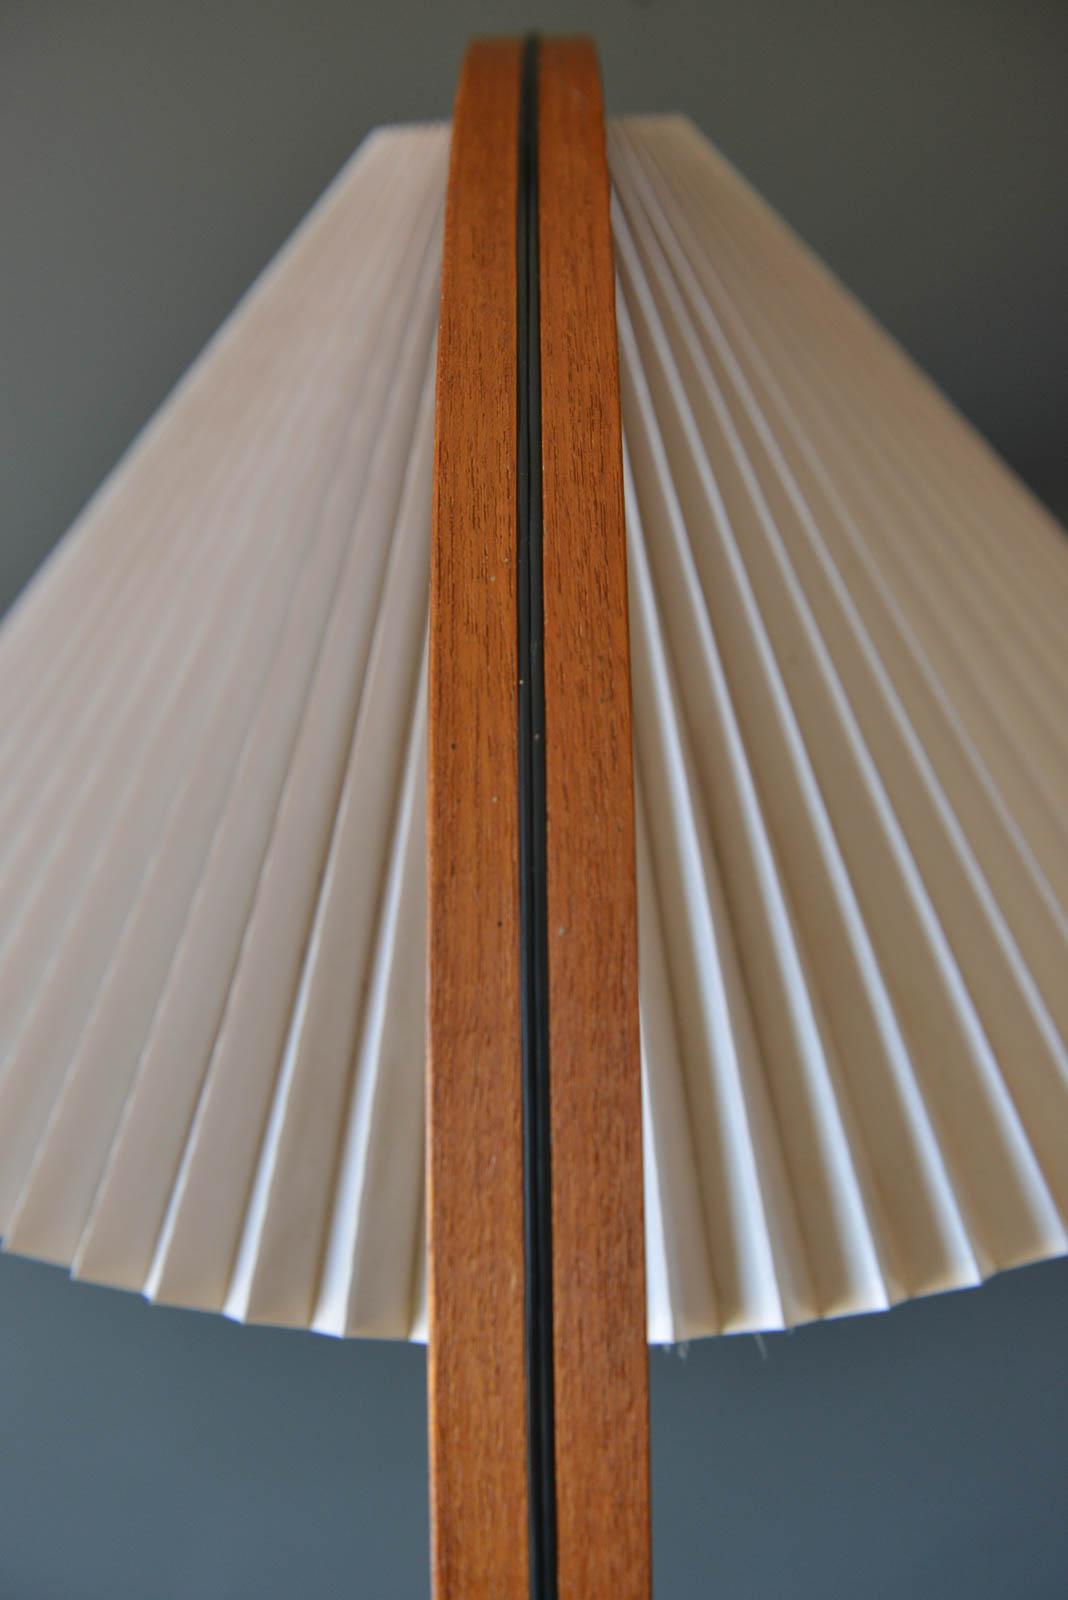 Late 20th Century Bentwood Floor Lamp by Mads Caprani of Denmark, circa 1971